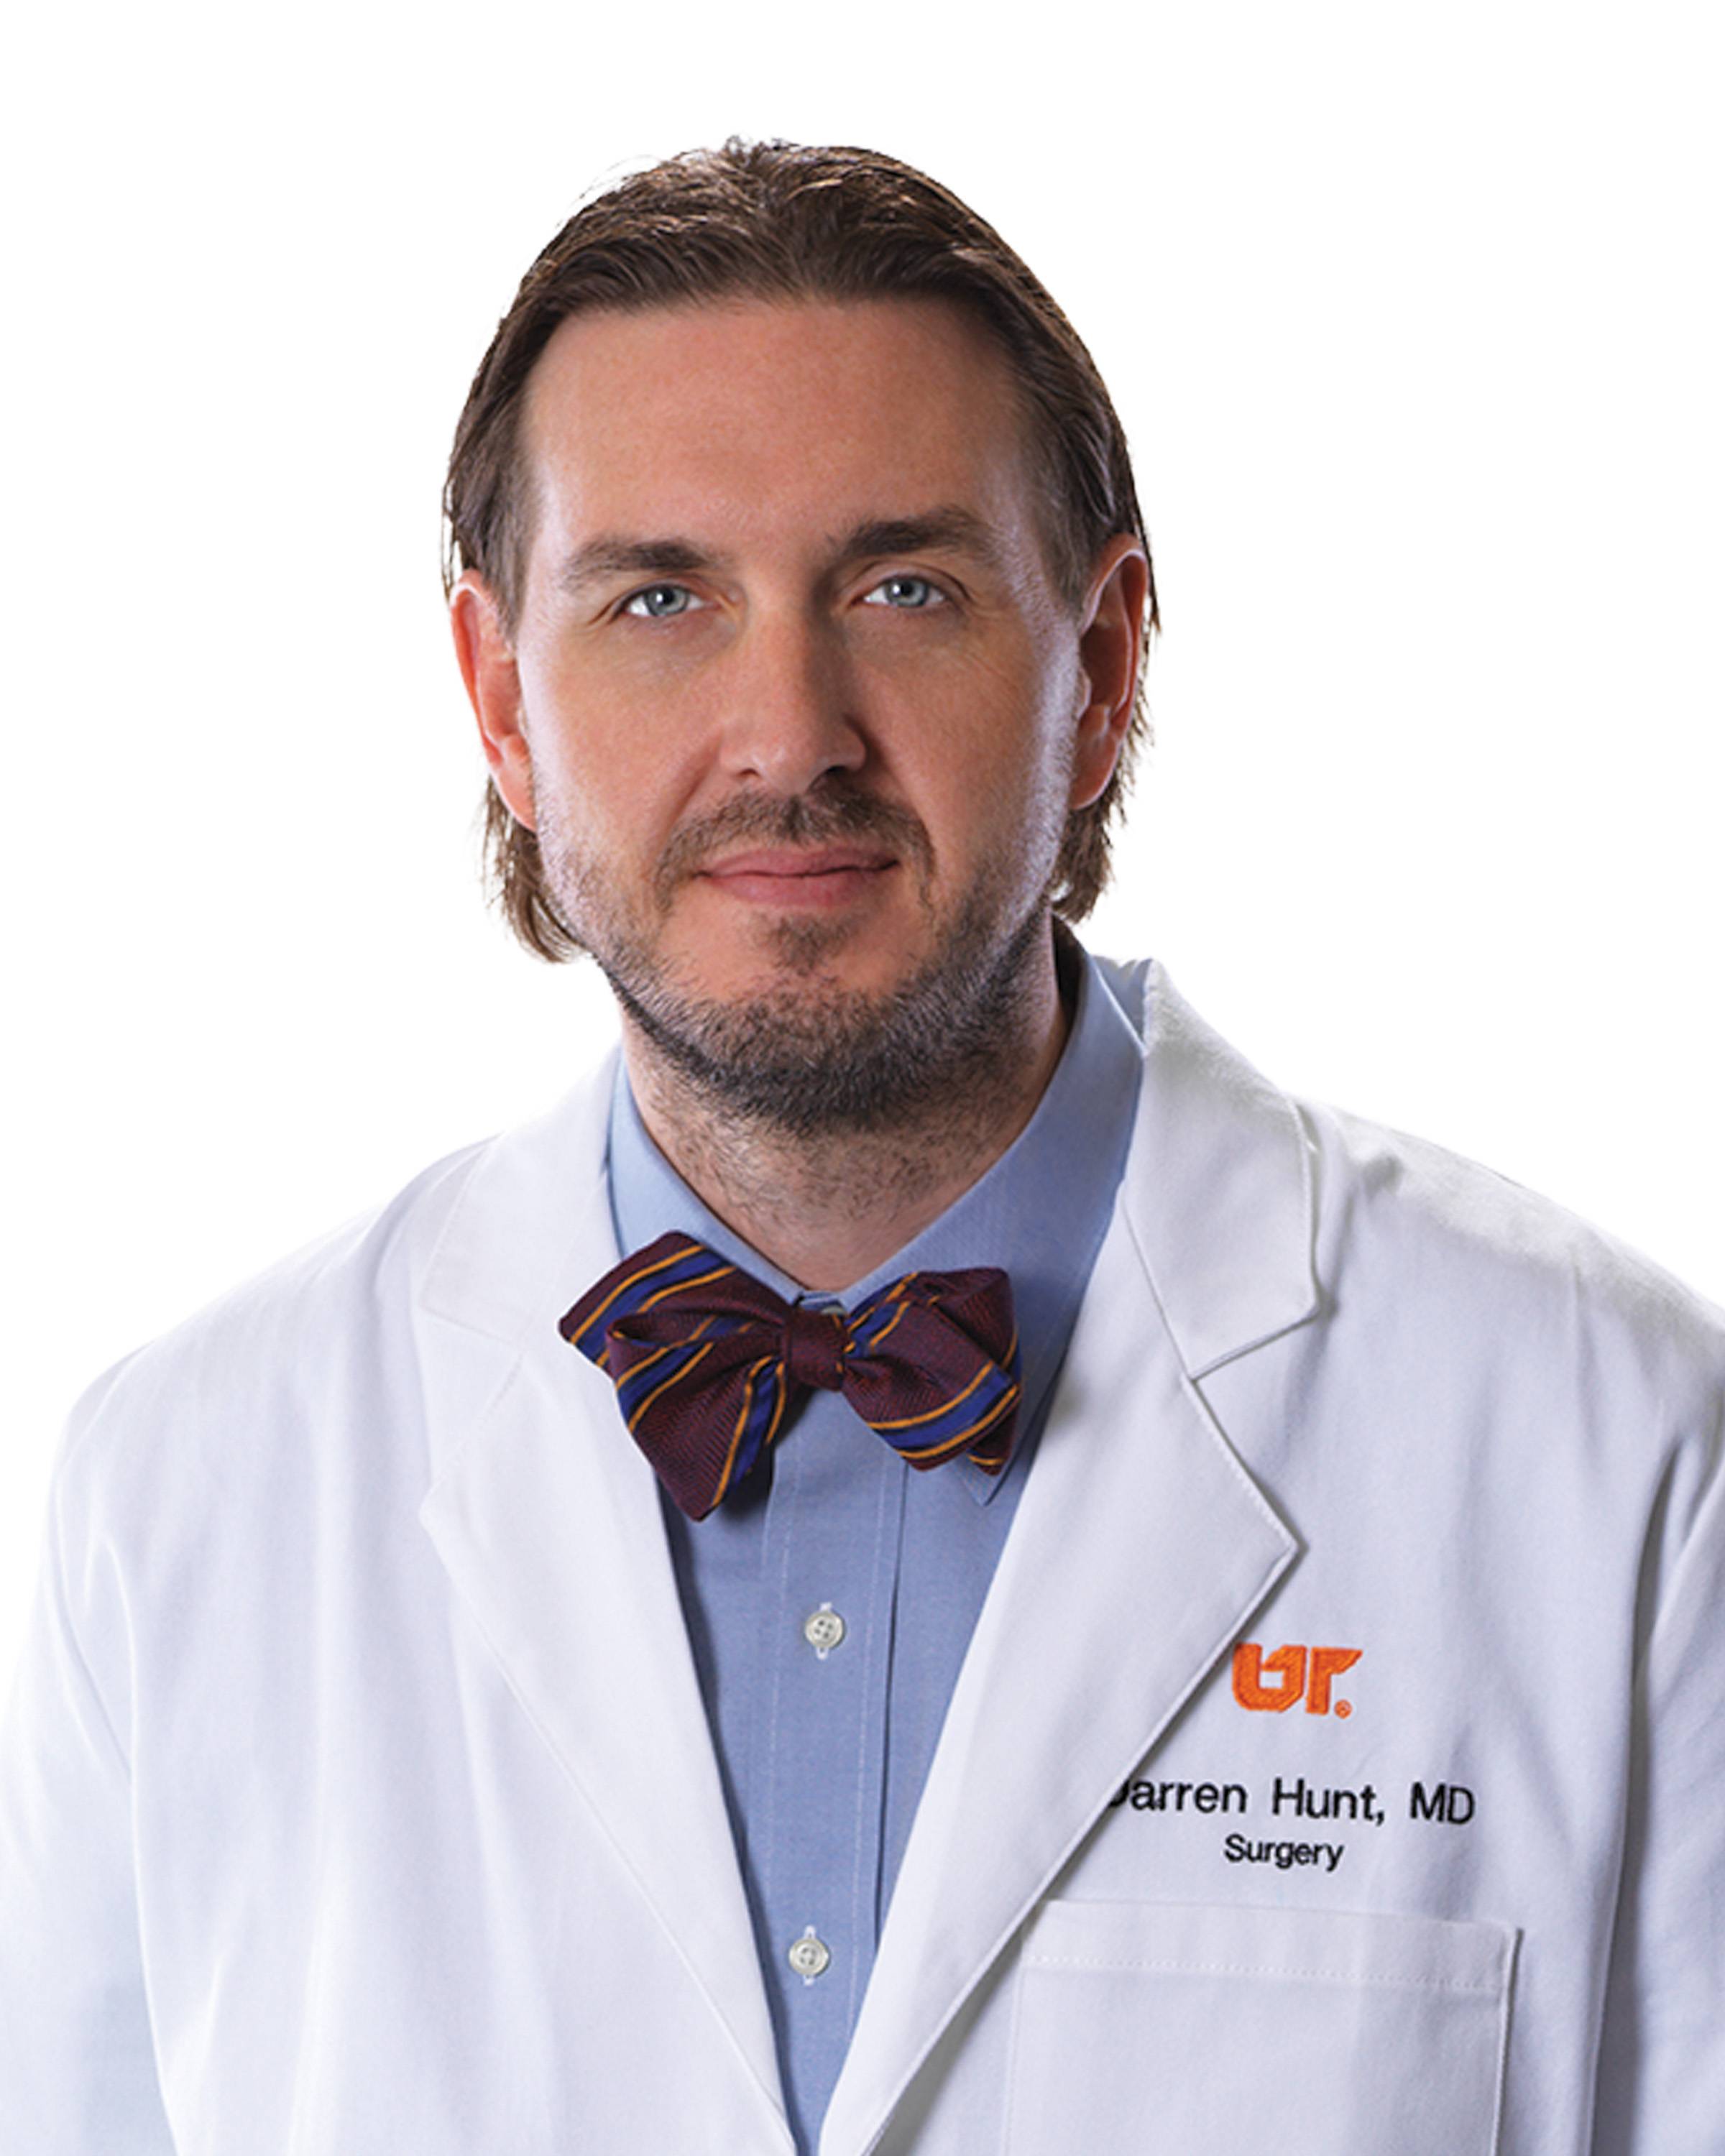 Darren J. Hunt, MD, FACS, Faculty, Surgery Residency and Surgical Critical Care Fellowship